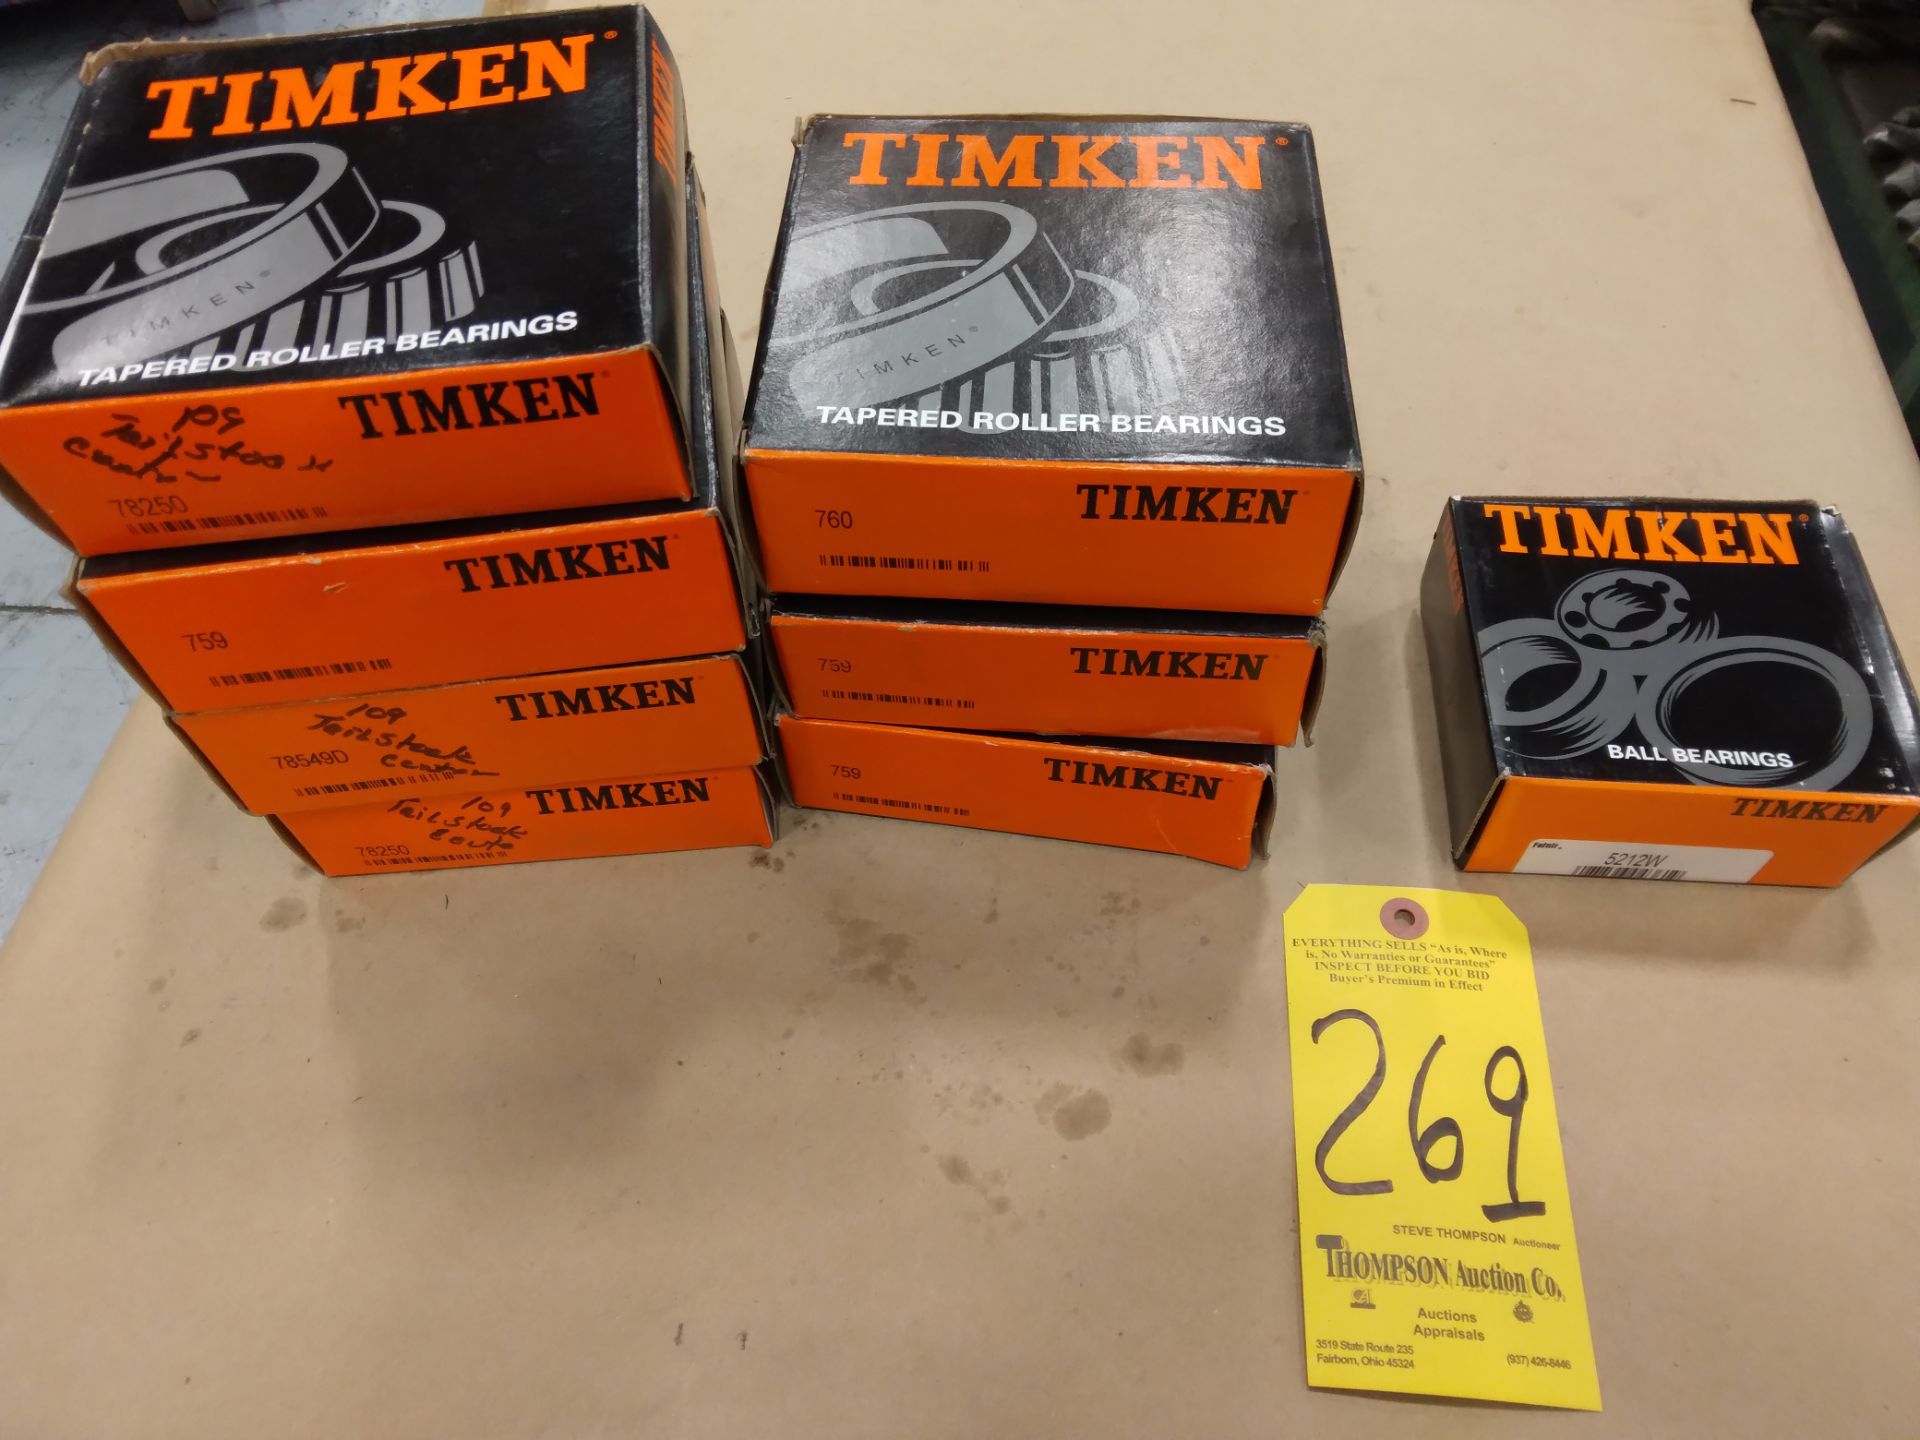 (5) Timken Tapered Roller Bearings, (3) #759, (2) #78250, (1) #760, (1) #78549D, and (1) #5212W